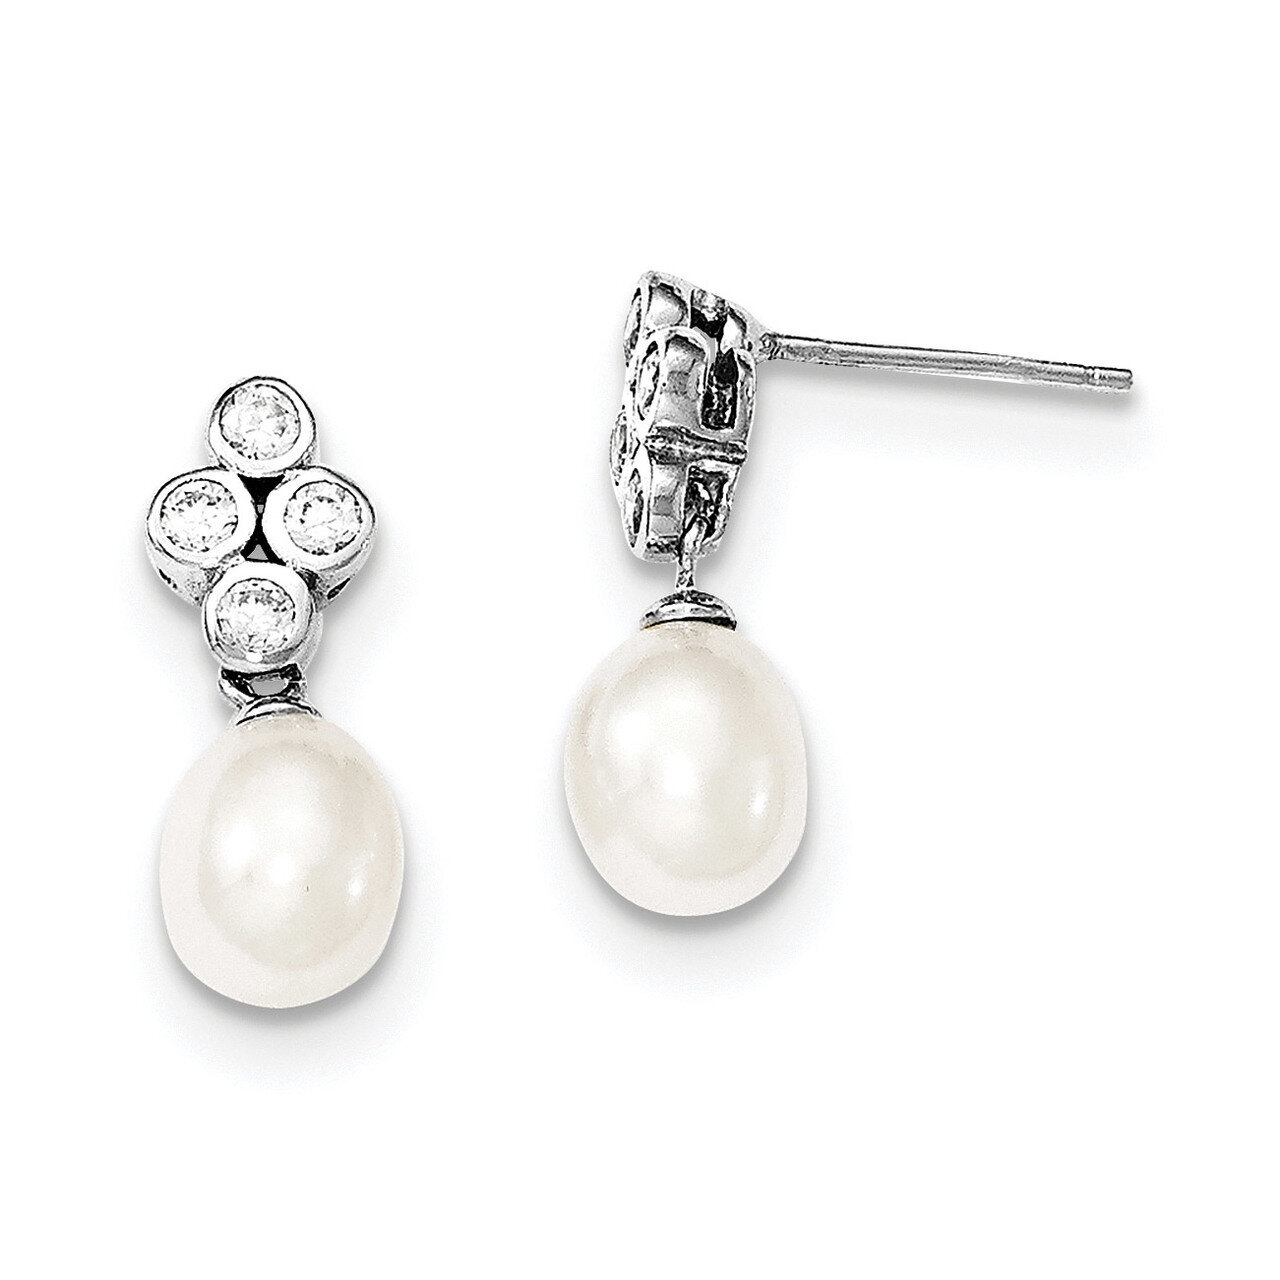 7-8mm White Cultured Freshwater Pearl CZ Diamond Post Dangle Earrings Sterling Silver Rhodium QE12778